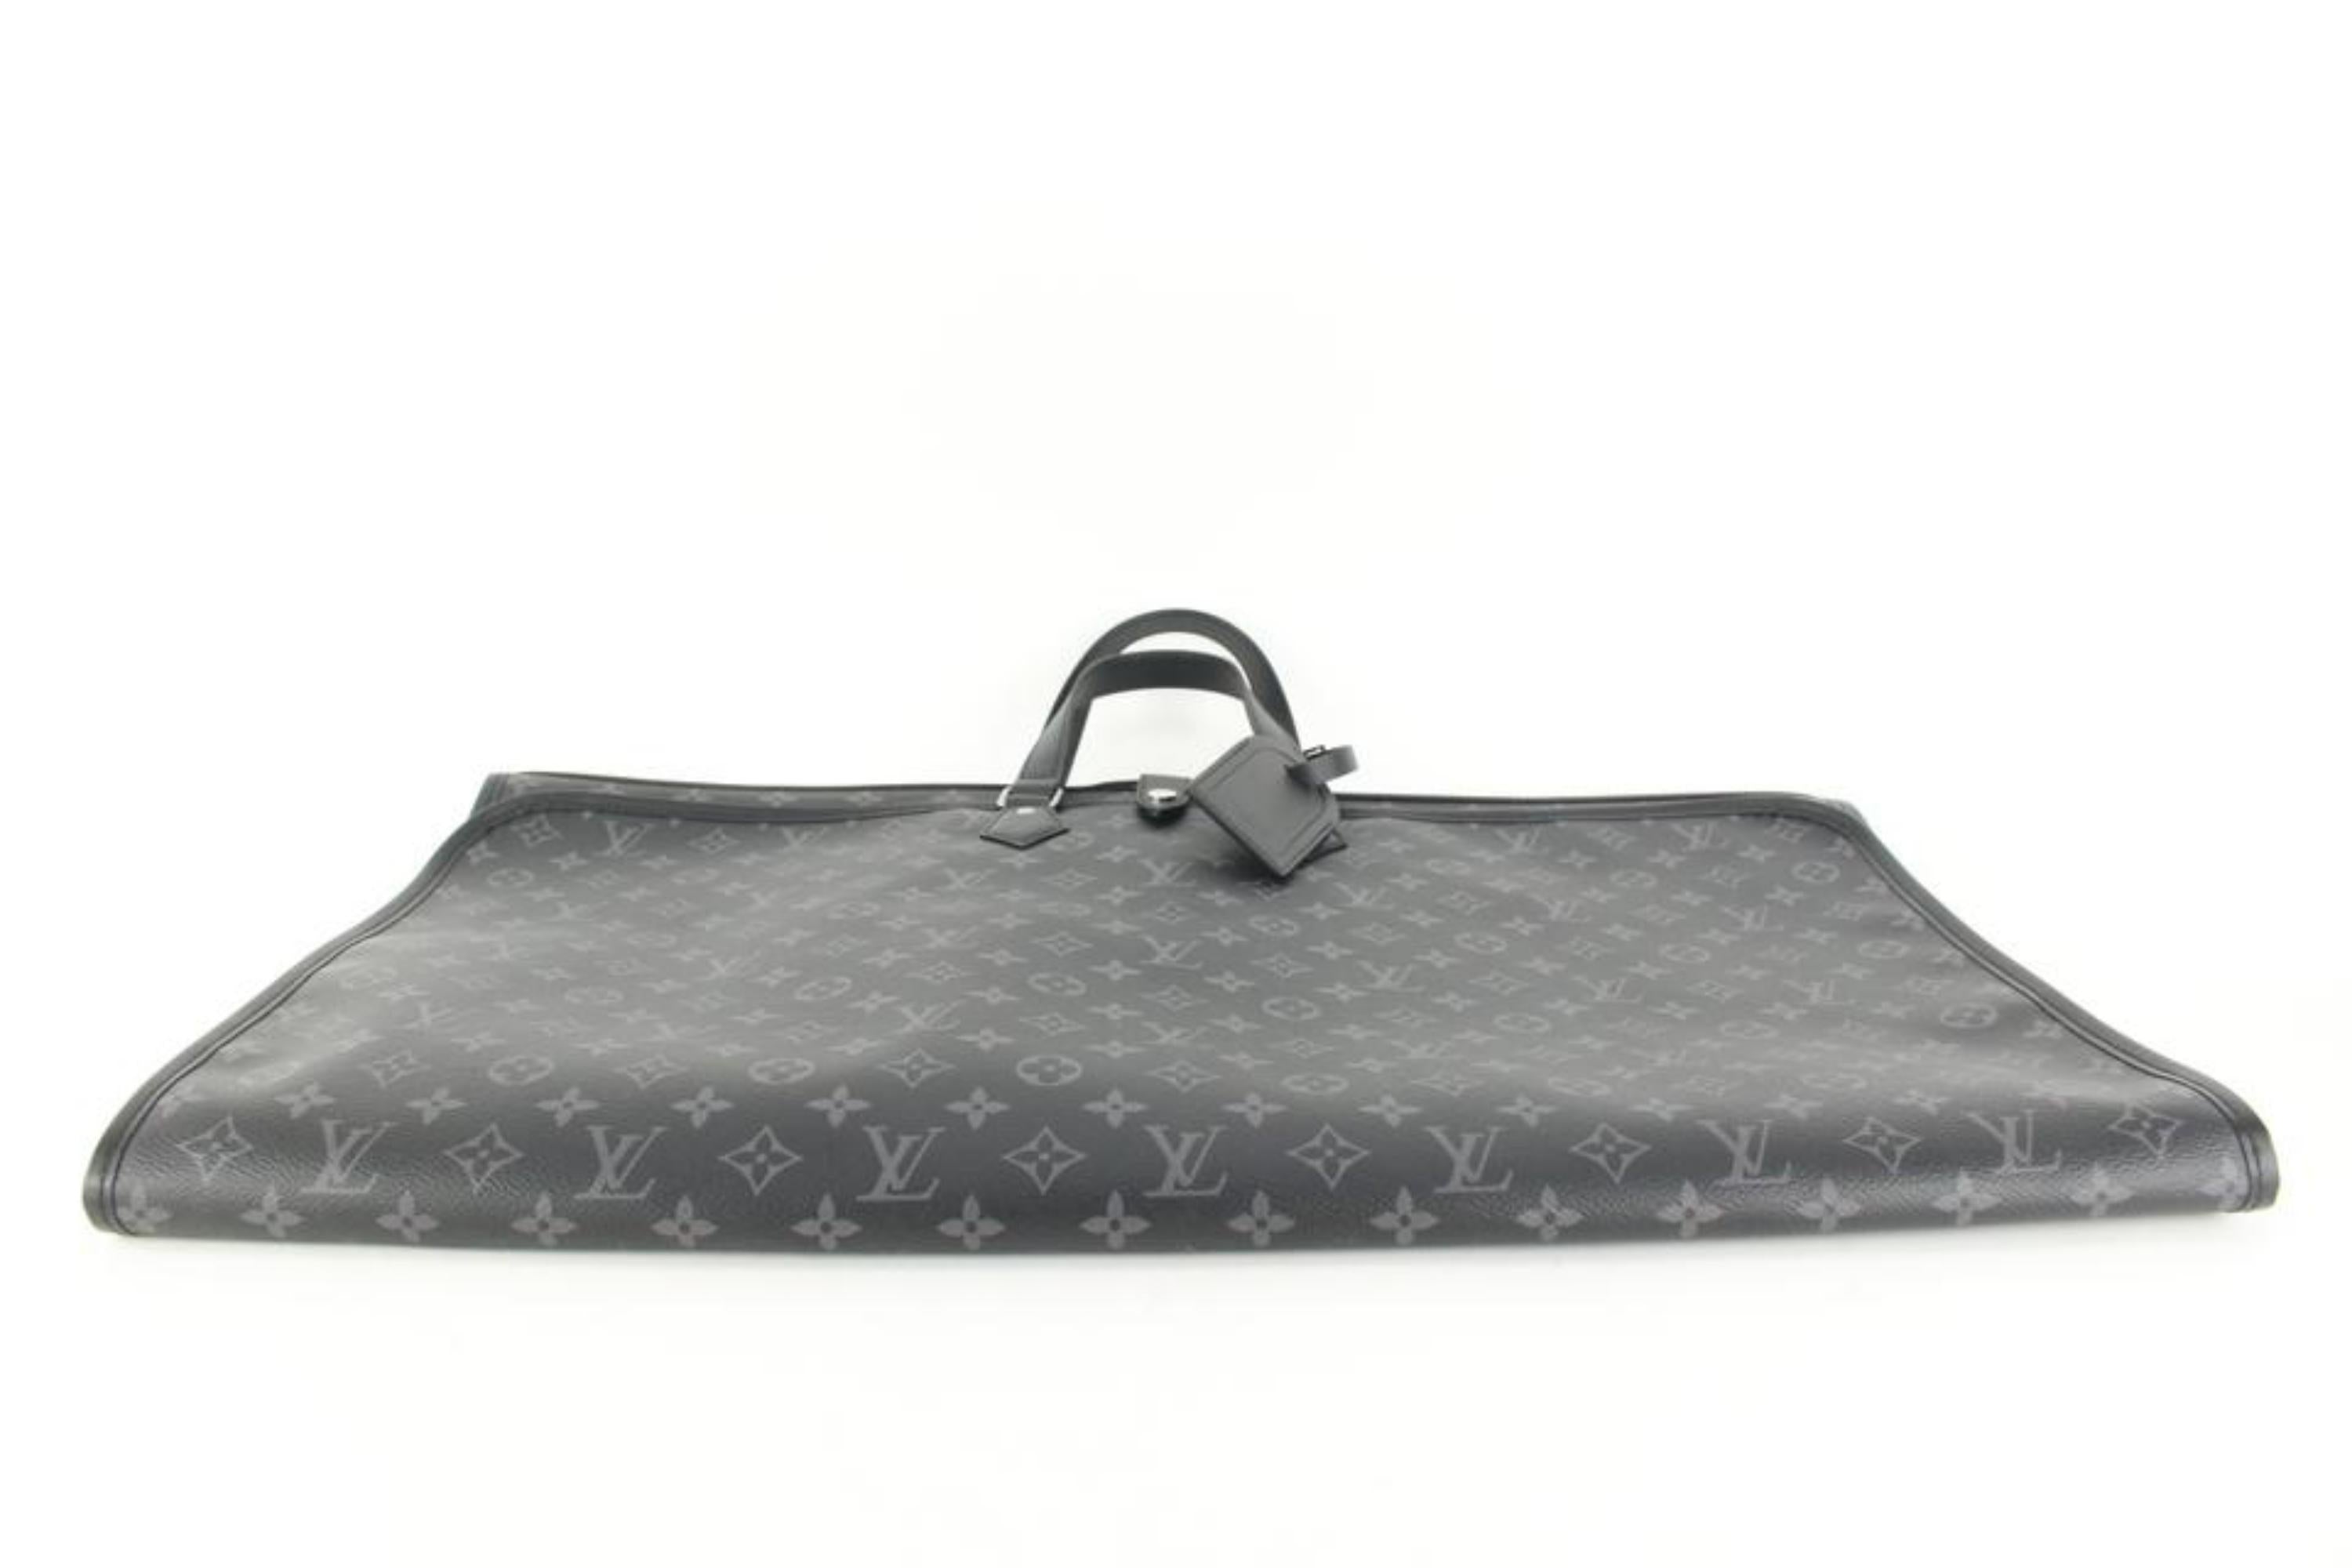 Louis Vuitton Replica Garment Bag sold at auction on 15th June